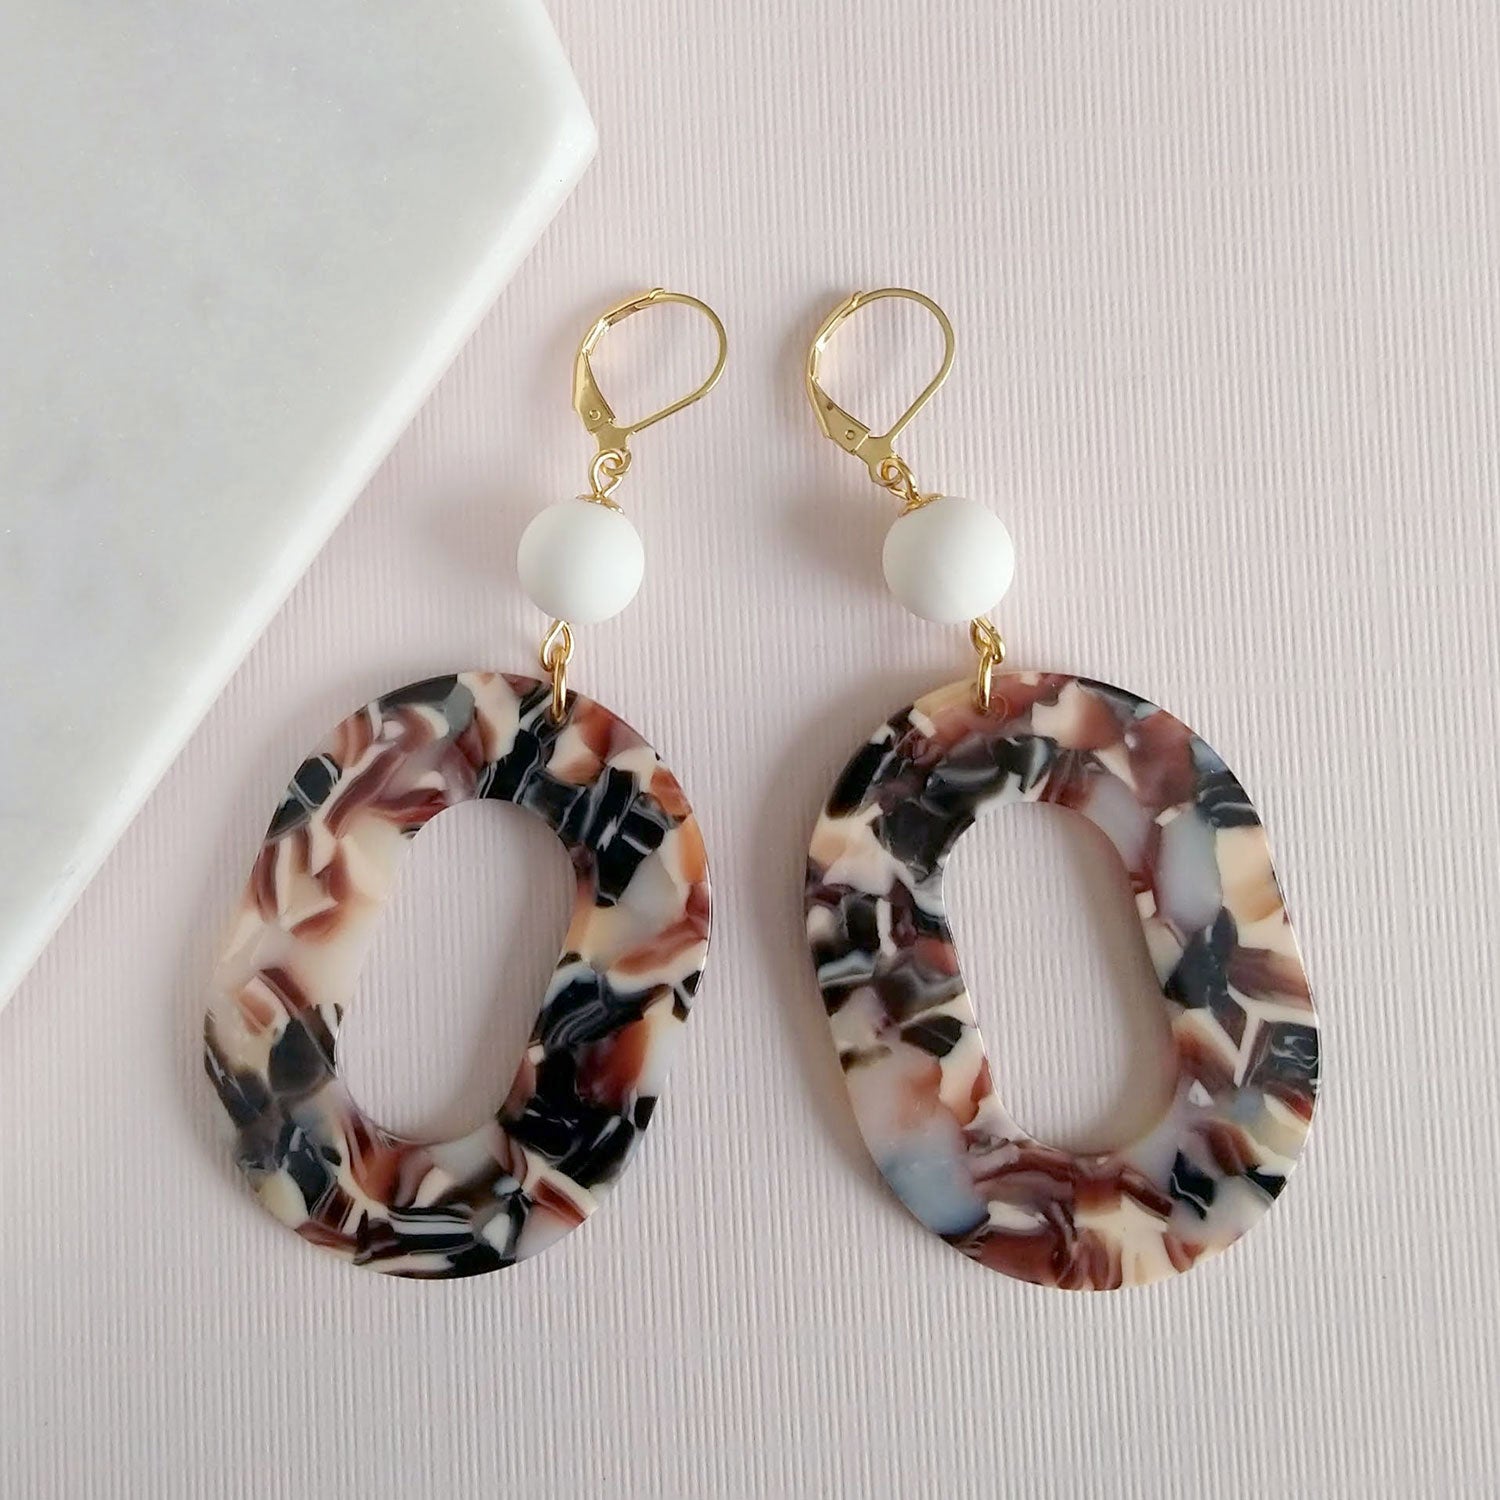 acetate earrings with vintage beads